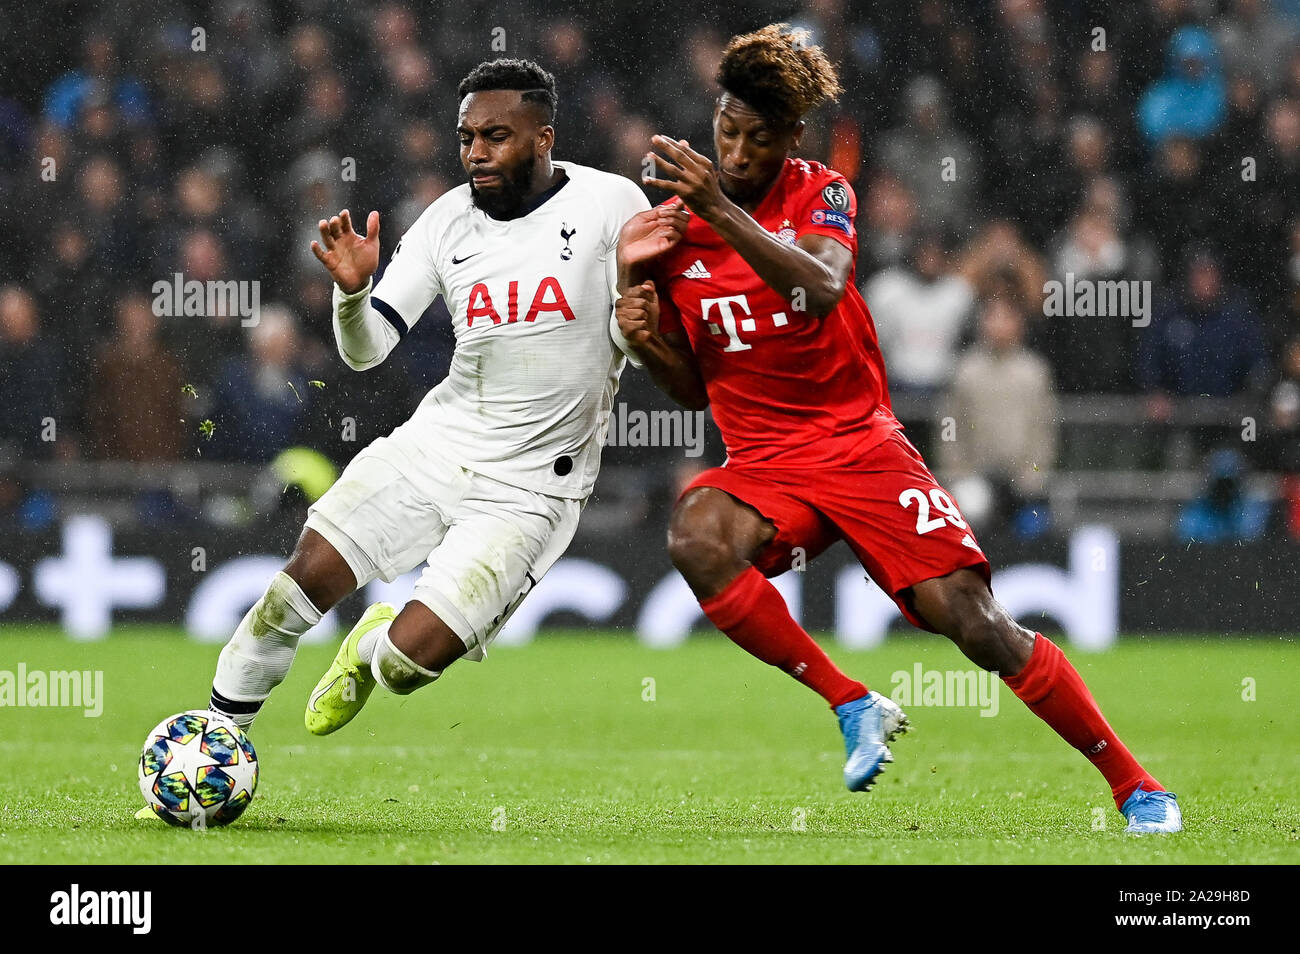 Danny Rose from Tottenham Hotspur (L) and Kingsley Coman from Bayern Munich (R) are seen in action during the UEFA Champions League (Group B) match between Tottenham Hotspur and Bayern Munich.(Final score; Tottenham Hotspur 2:7 Bayern Munich) Stock Photo